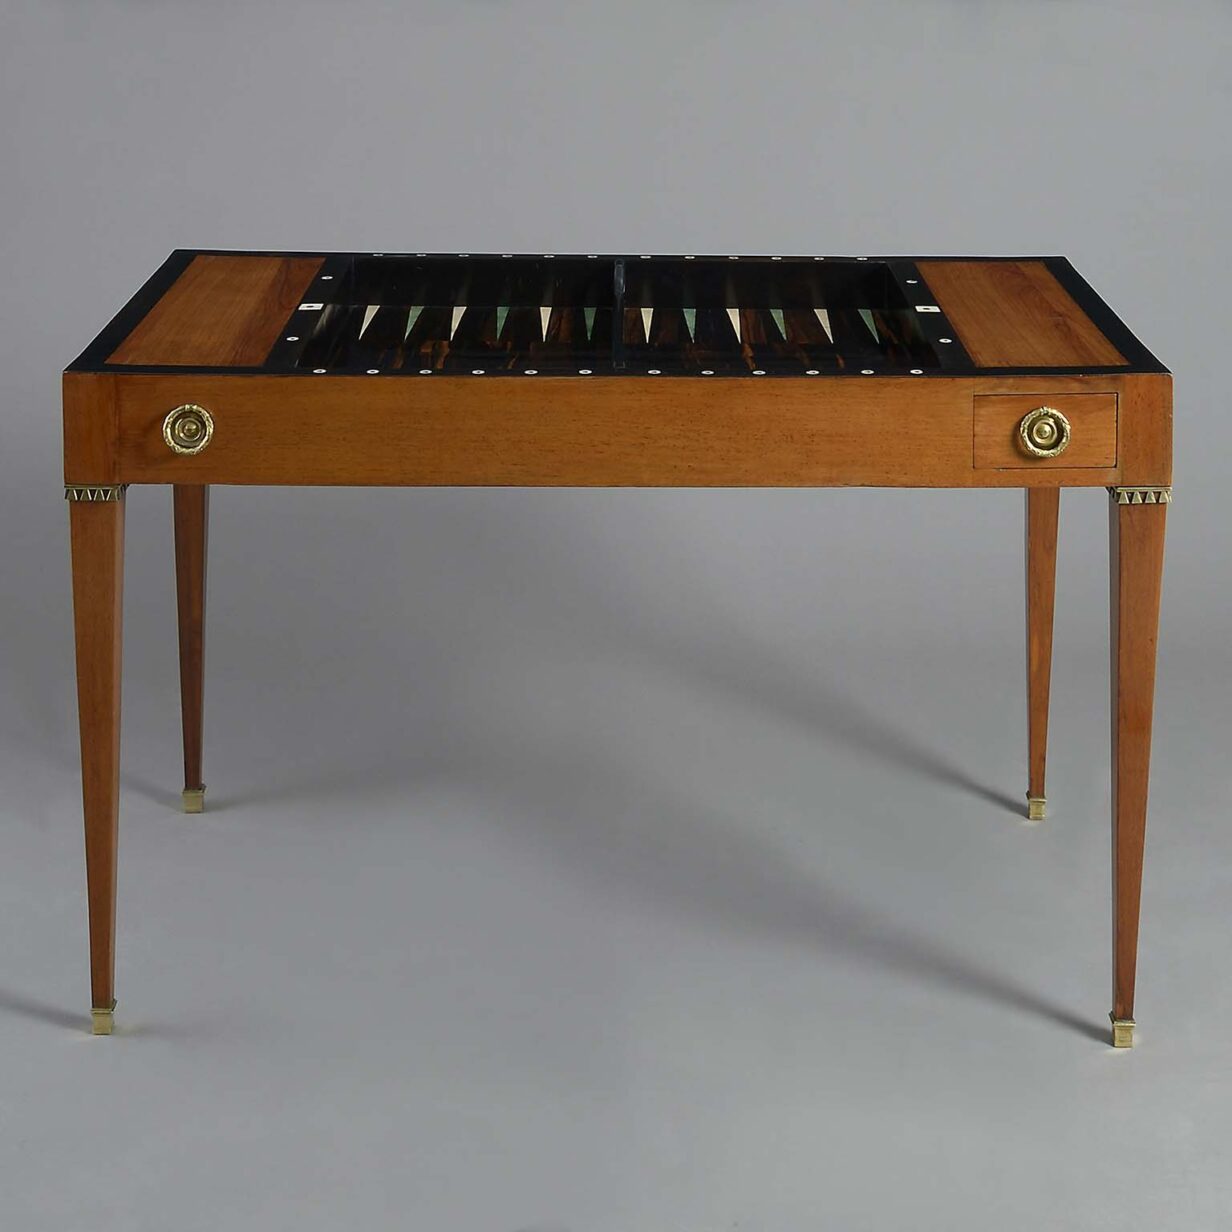 Antique tric trac games table